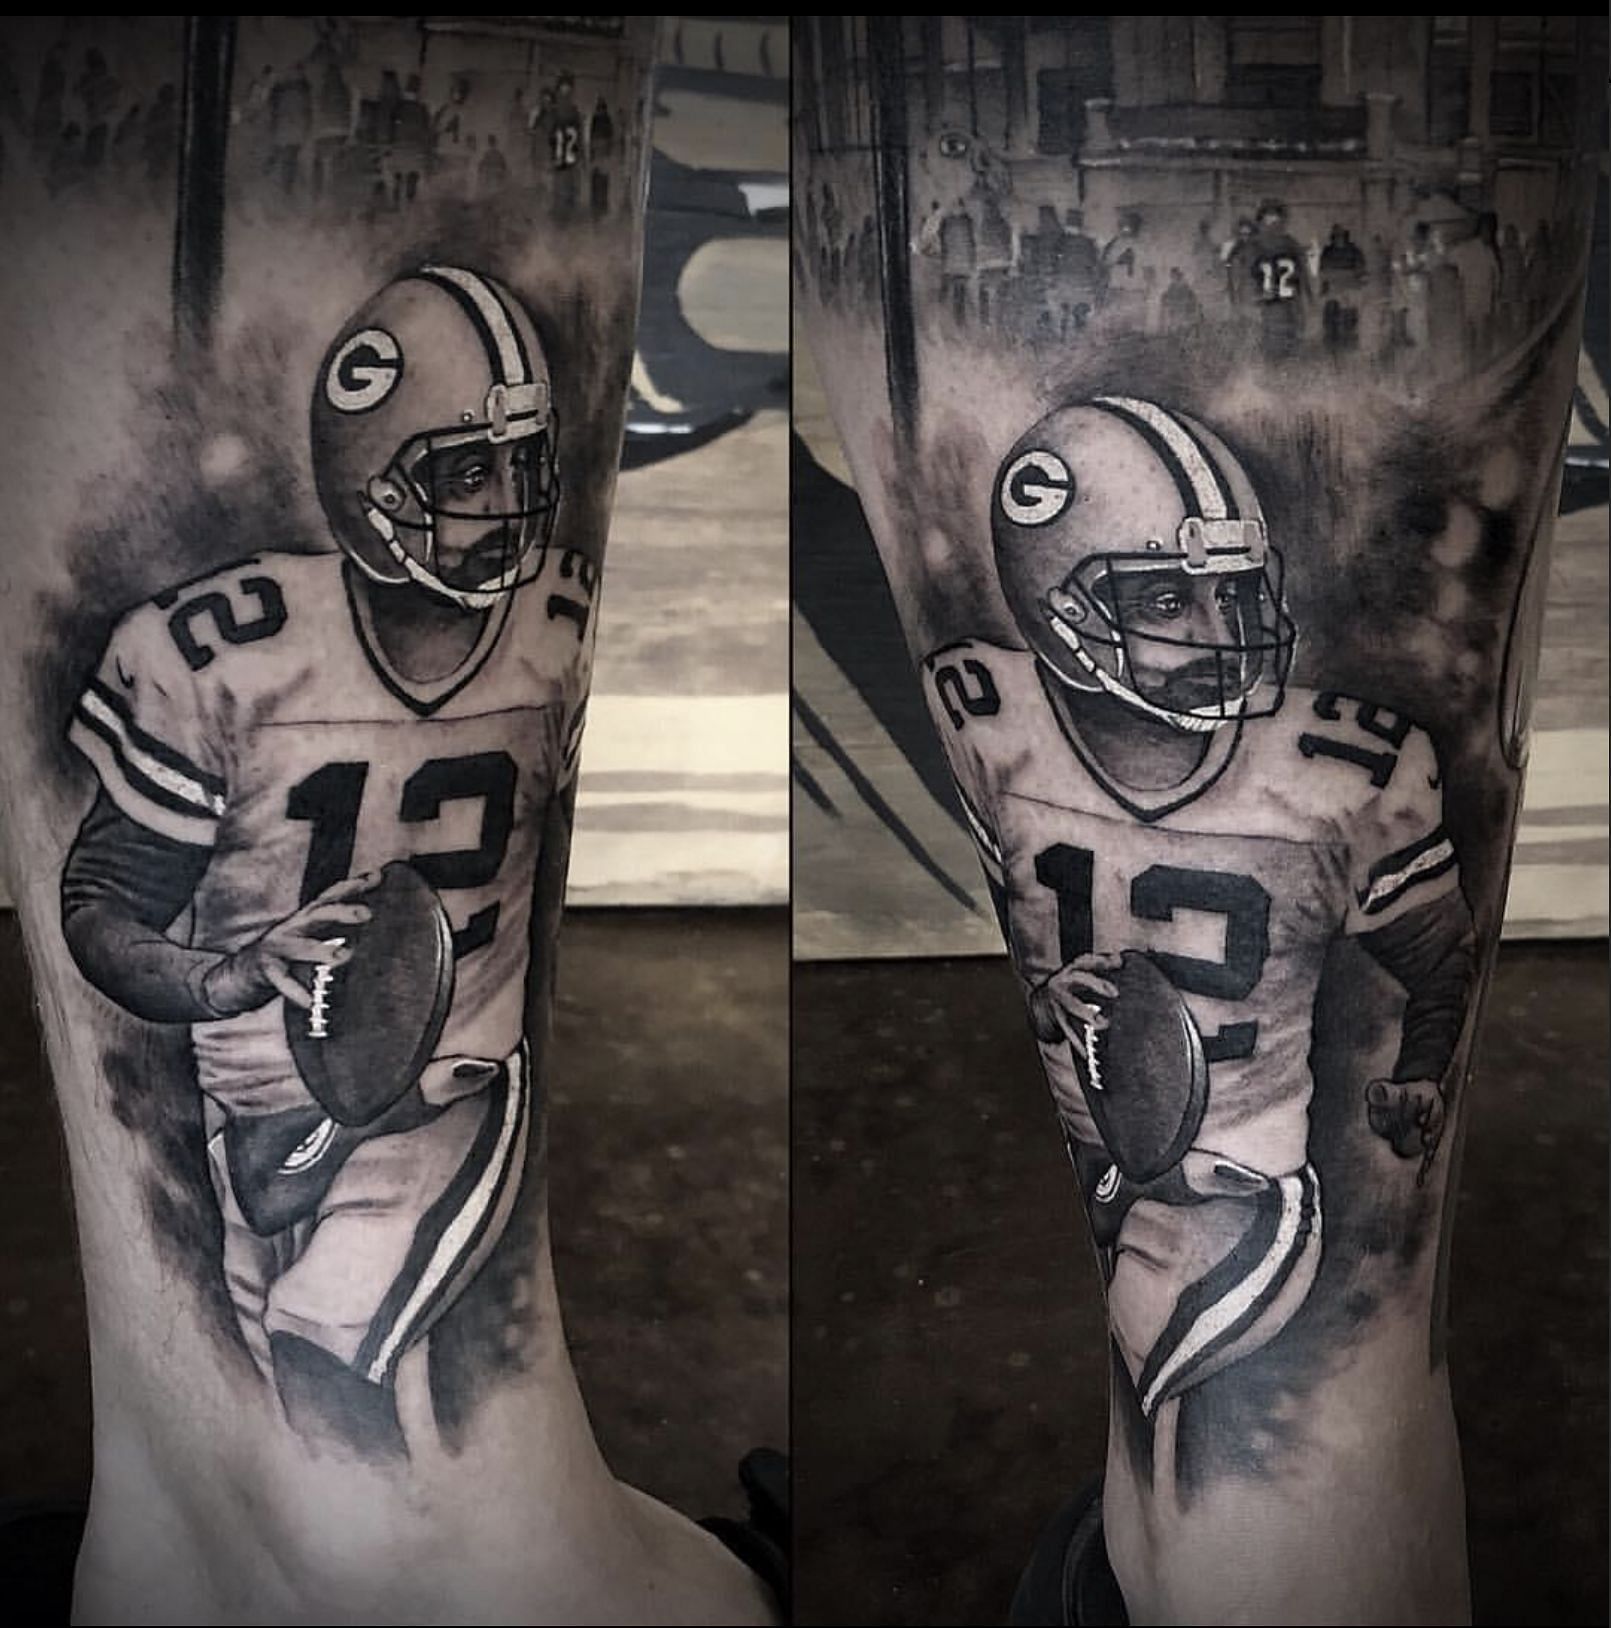 This fan showed his love for the Packers in a classic way. Source: graysondavidart (IG)